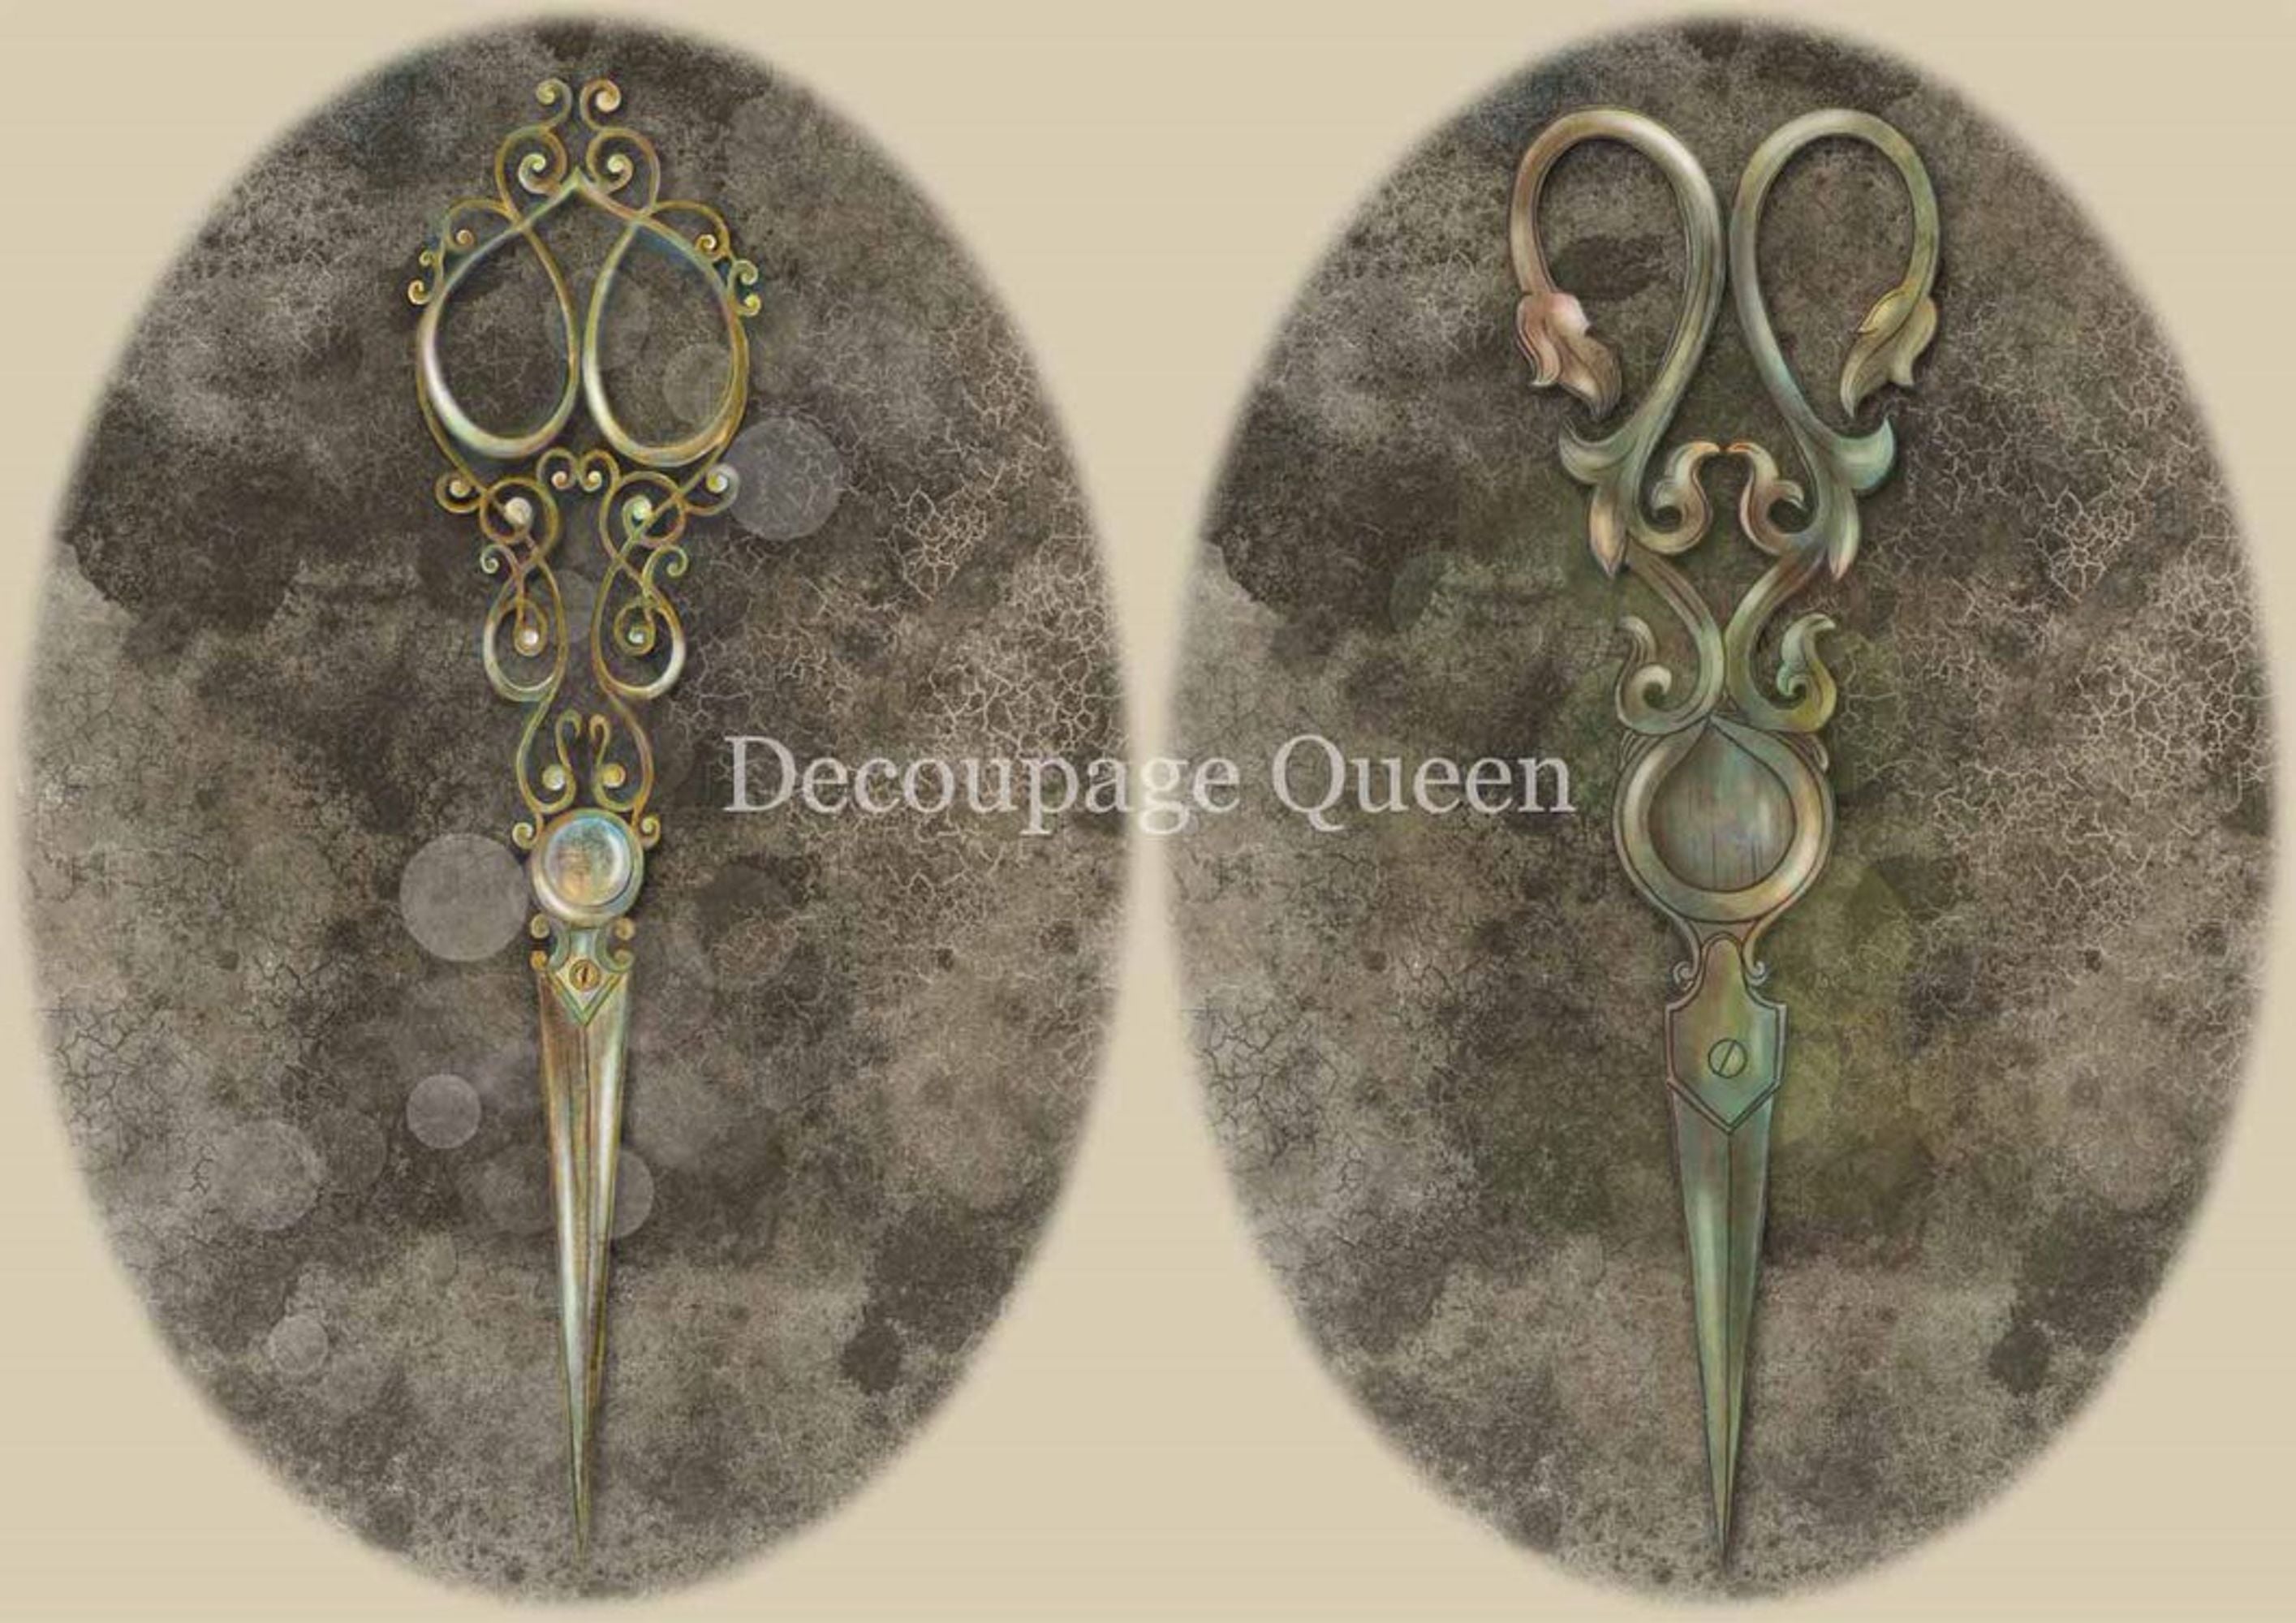 Dainty and the Queen - Pair of Scissors A4 Rice Paper - 5 Sheets